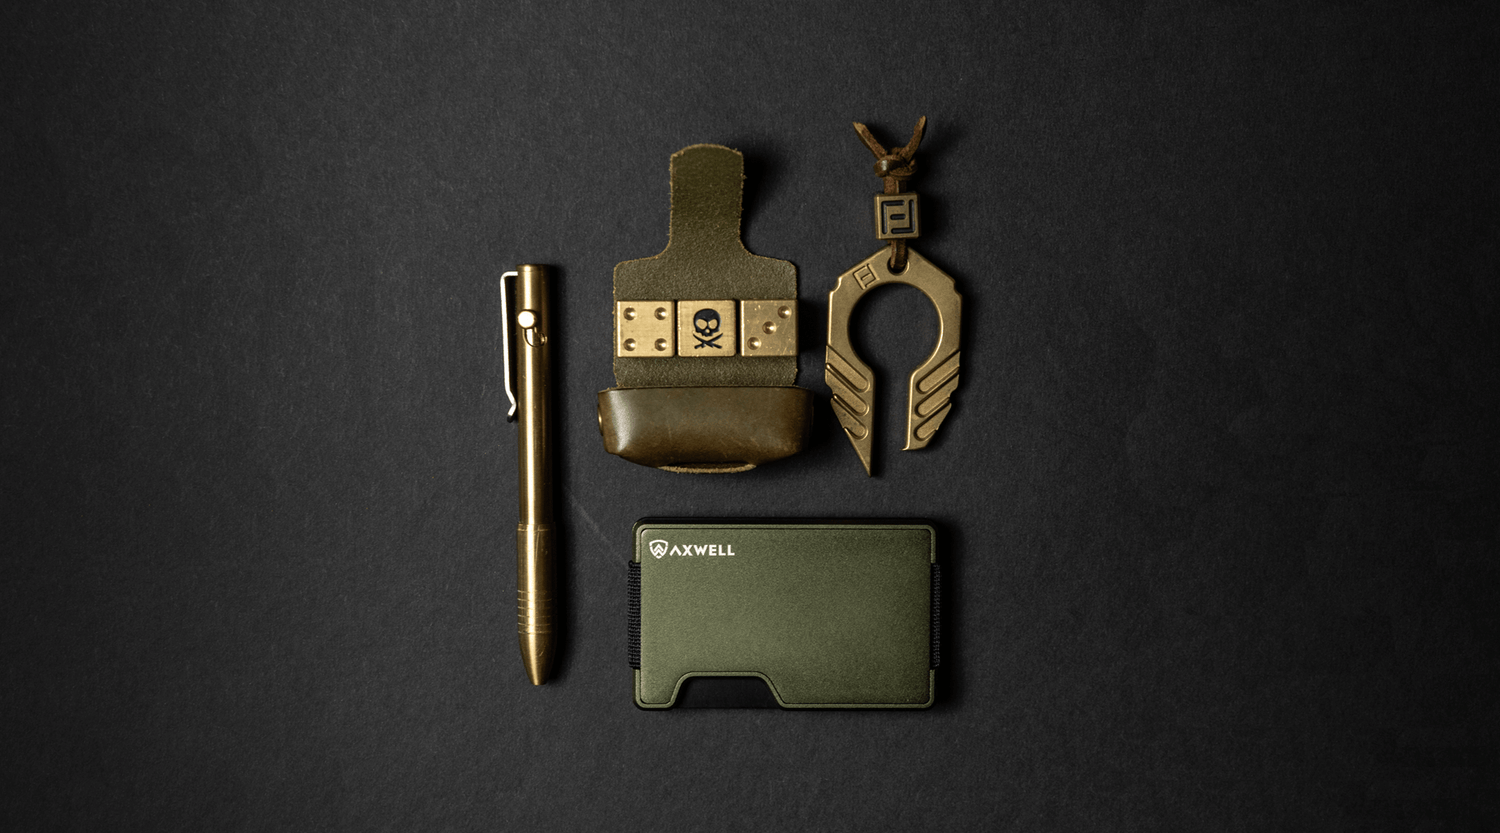 Tactical Wallets - Everything You Need to Know